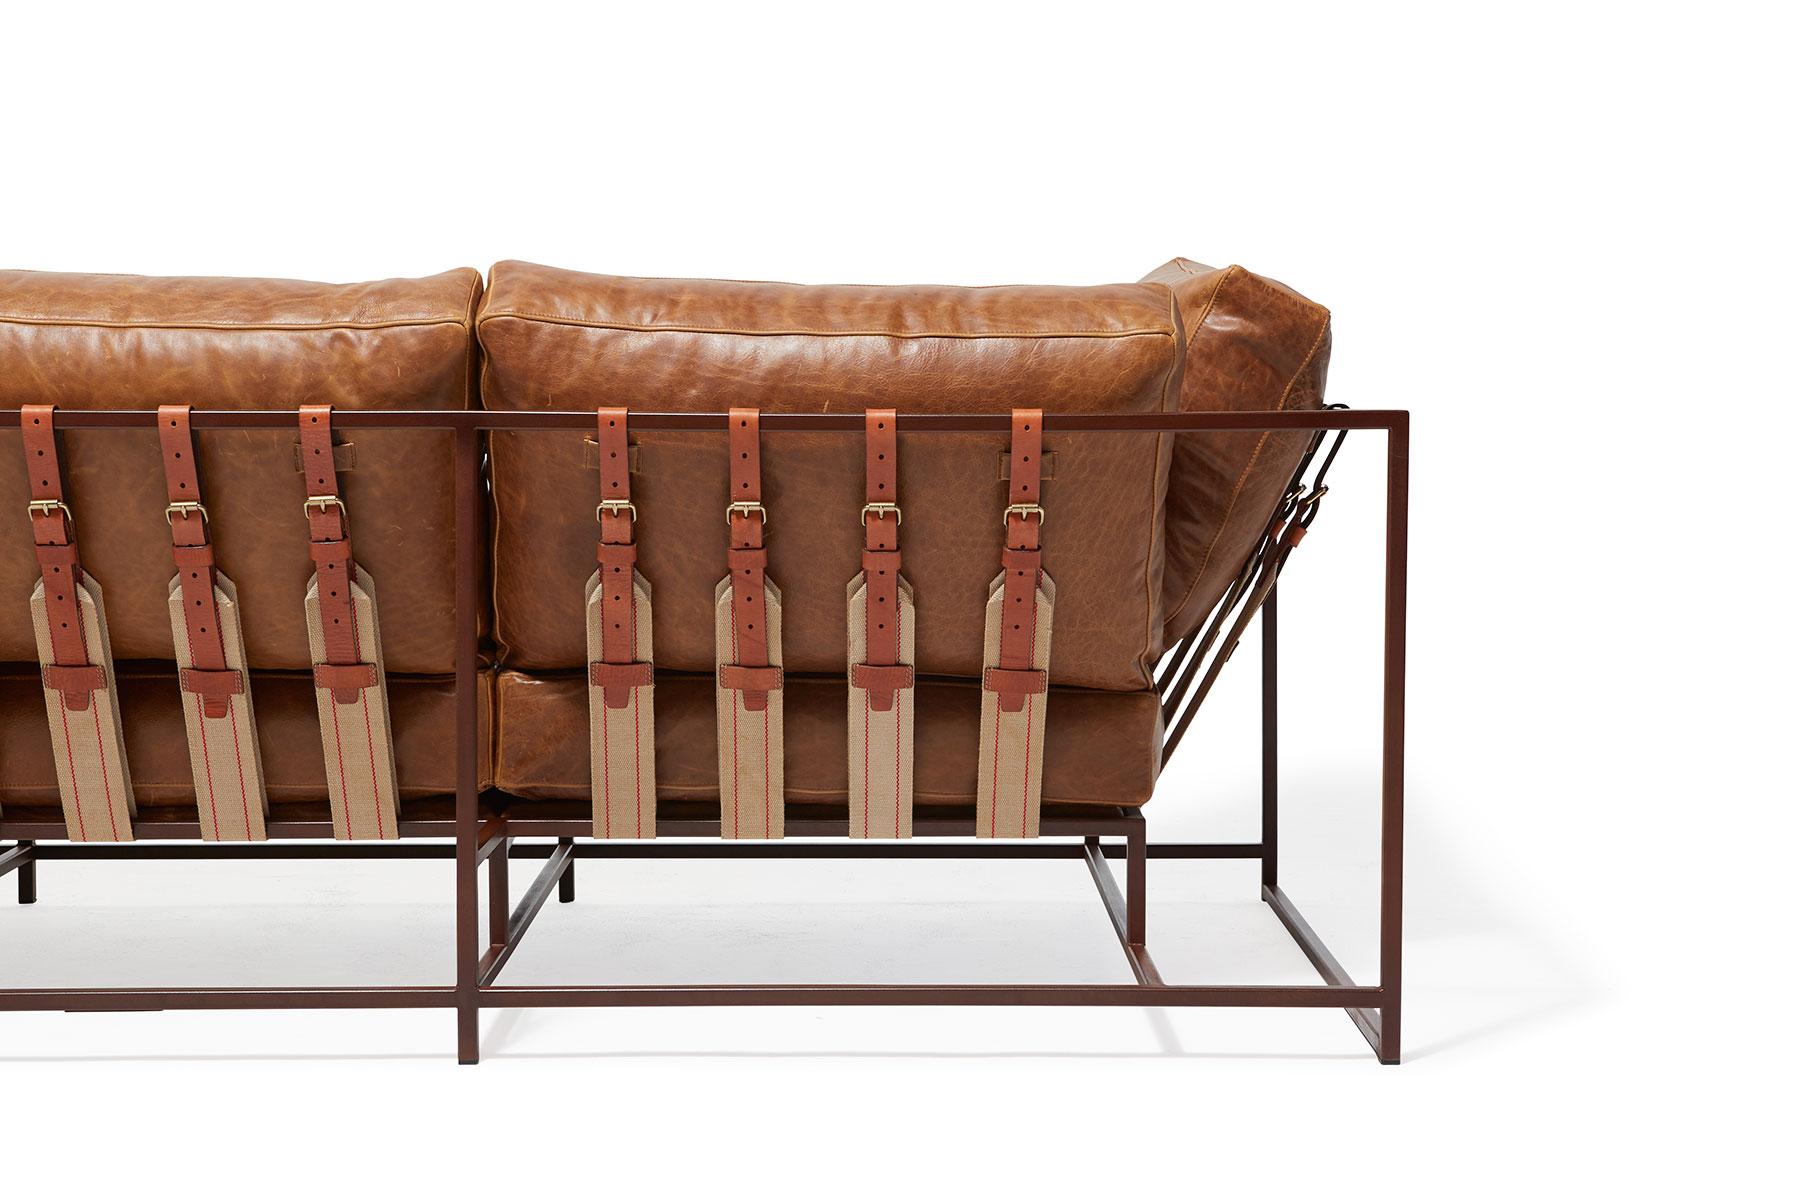 Modern Waxed Cognac Leather and Marbled Rust Sofa For Sale